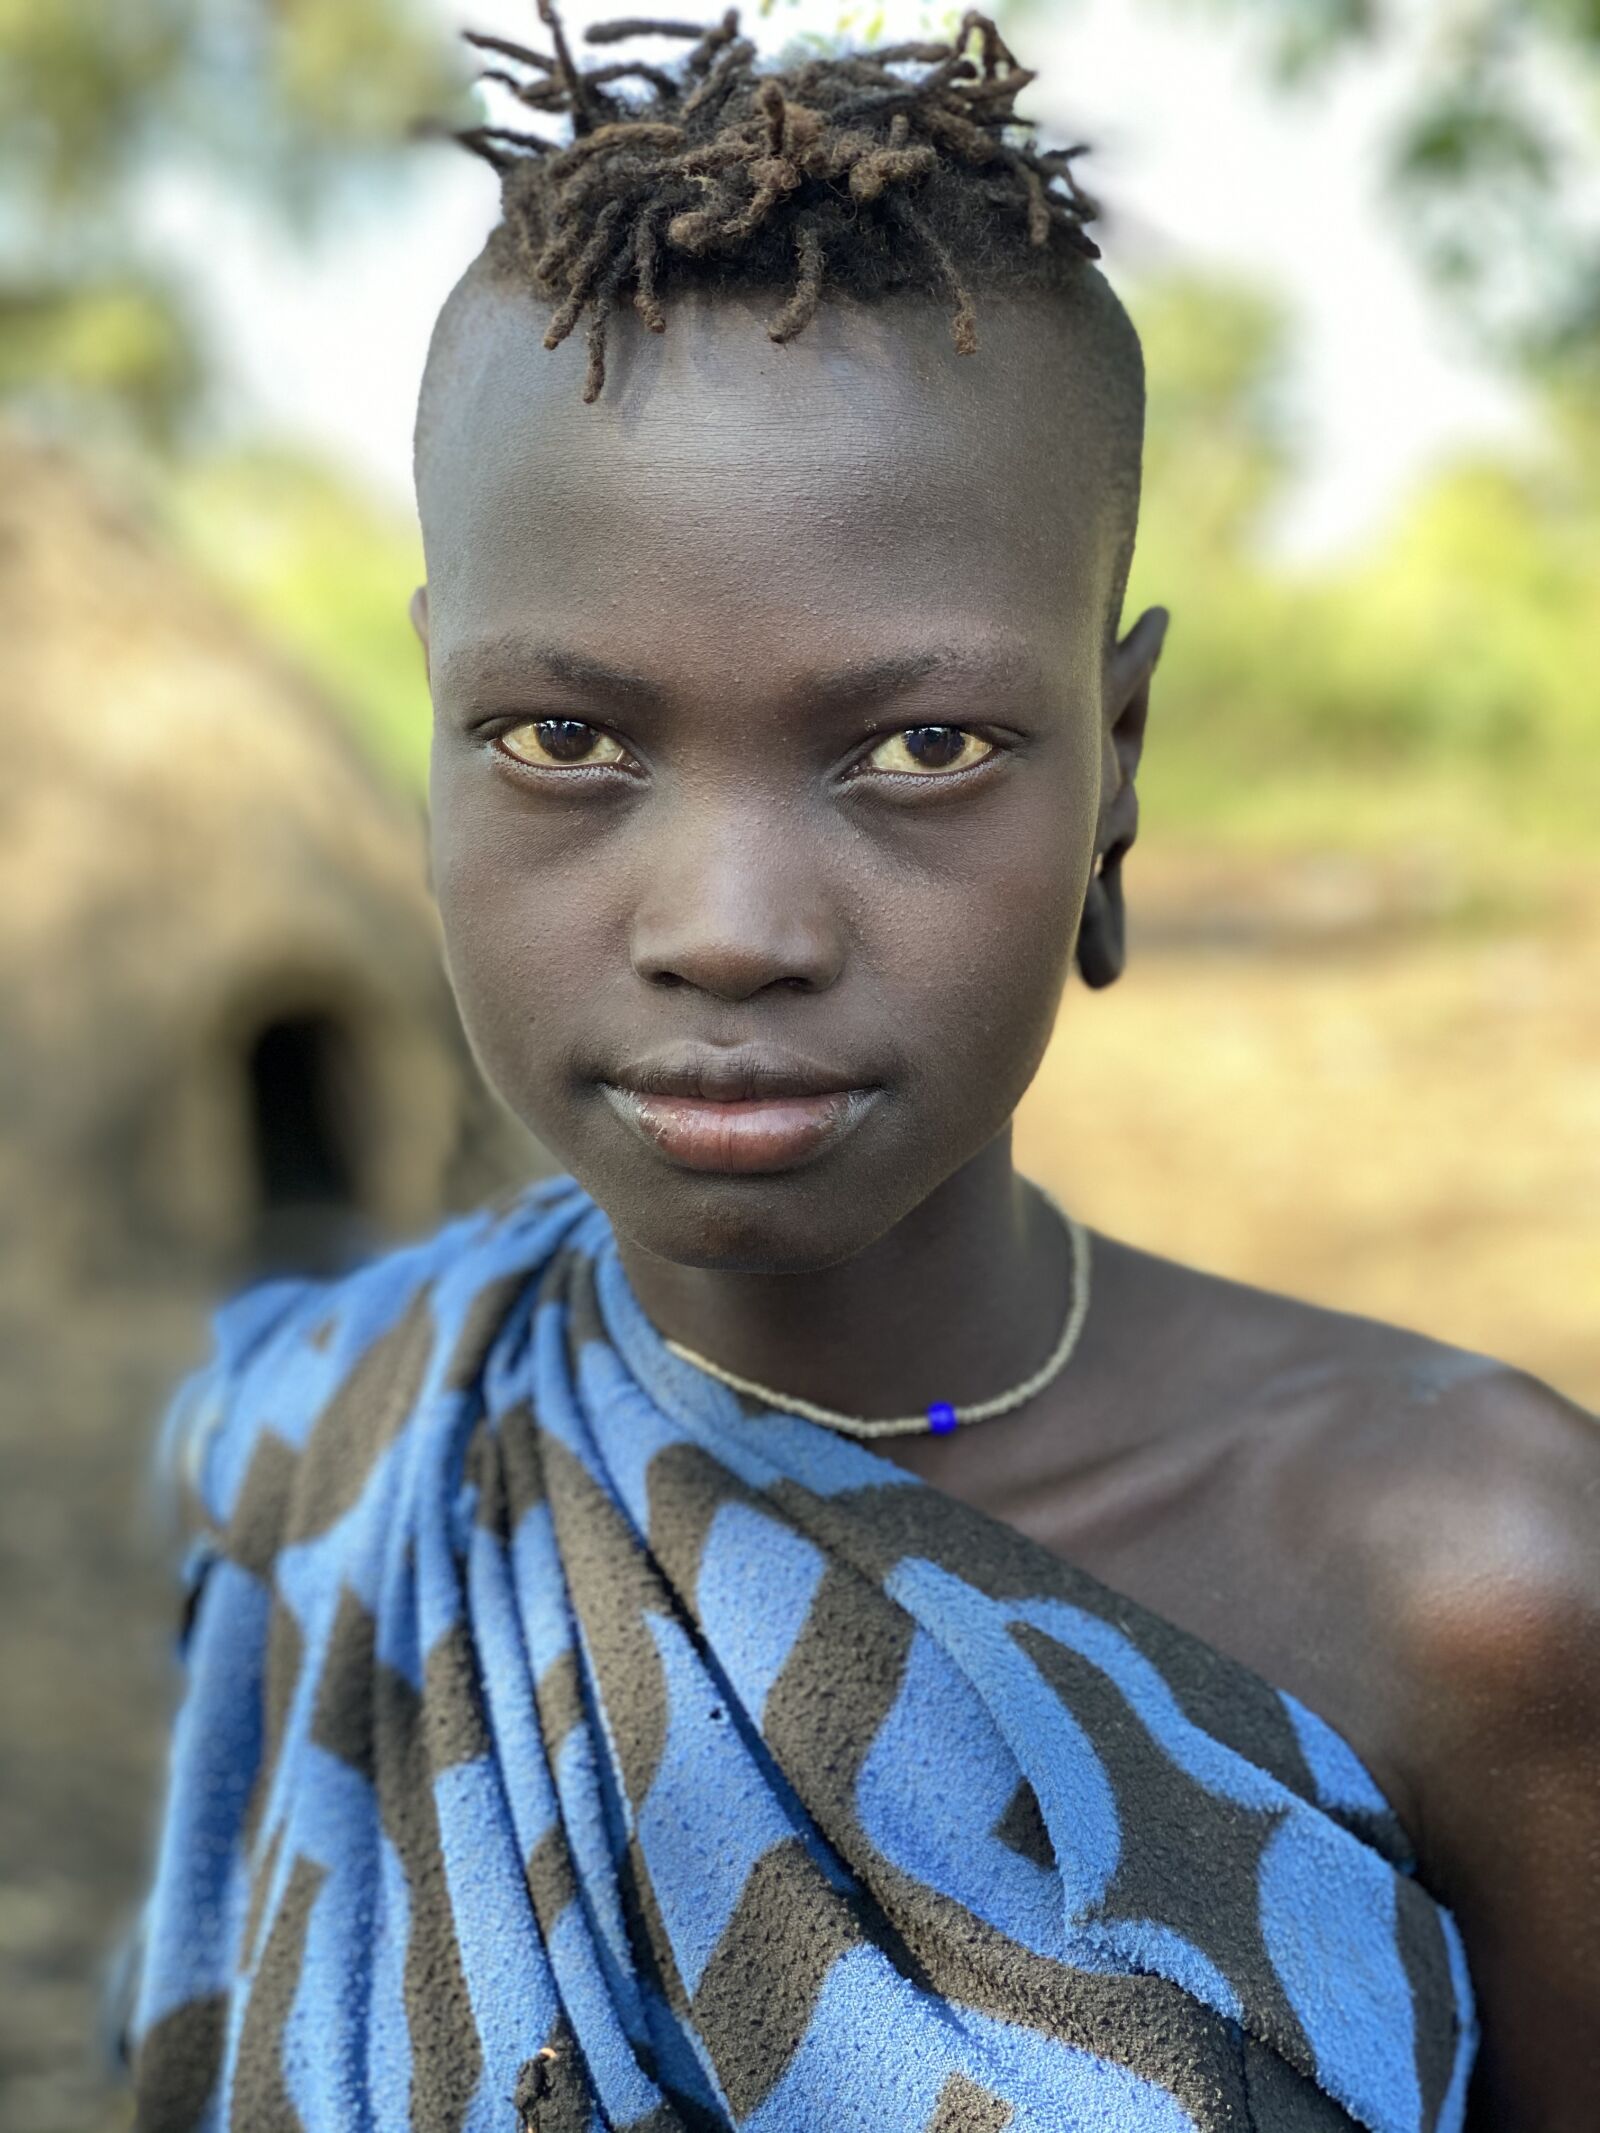 iPhone 11 Pro back dual camera 6mm f/2 sample photo. Omo, valley, ethiopia photography